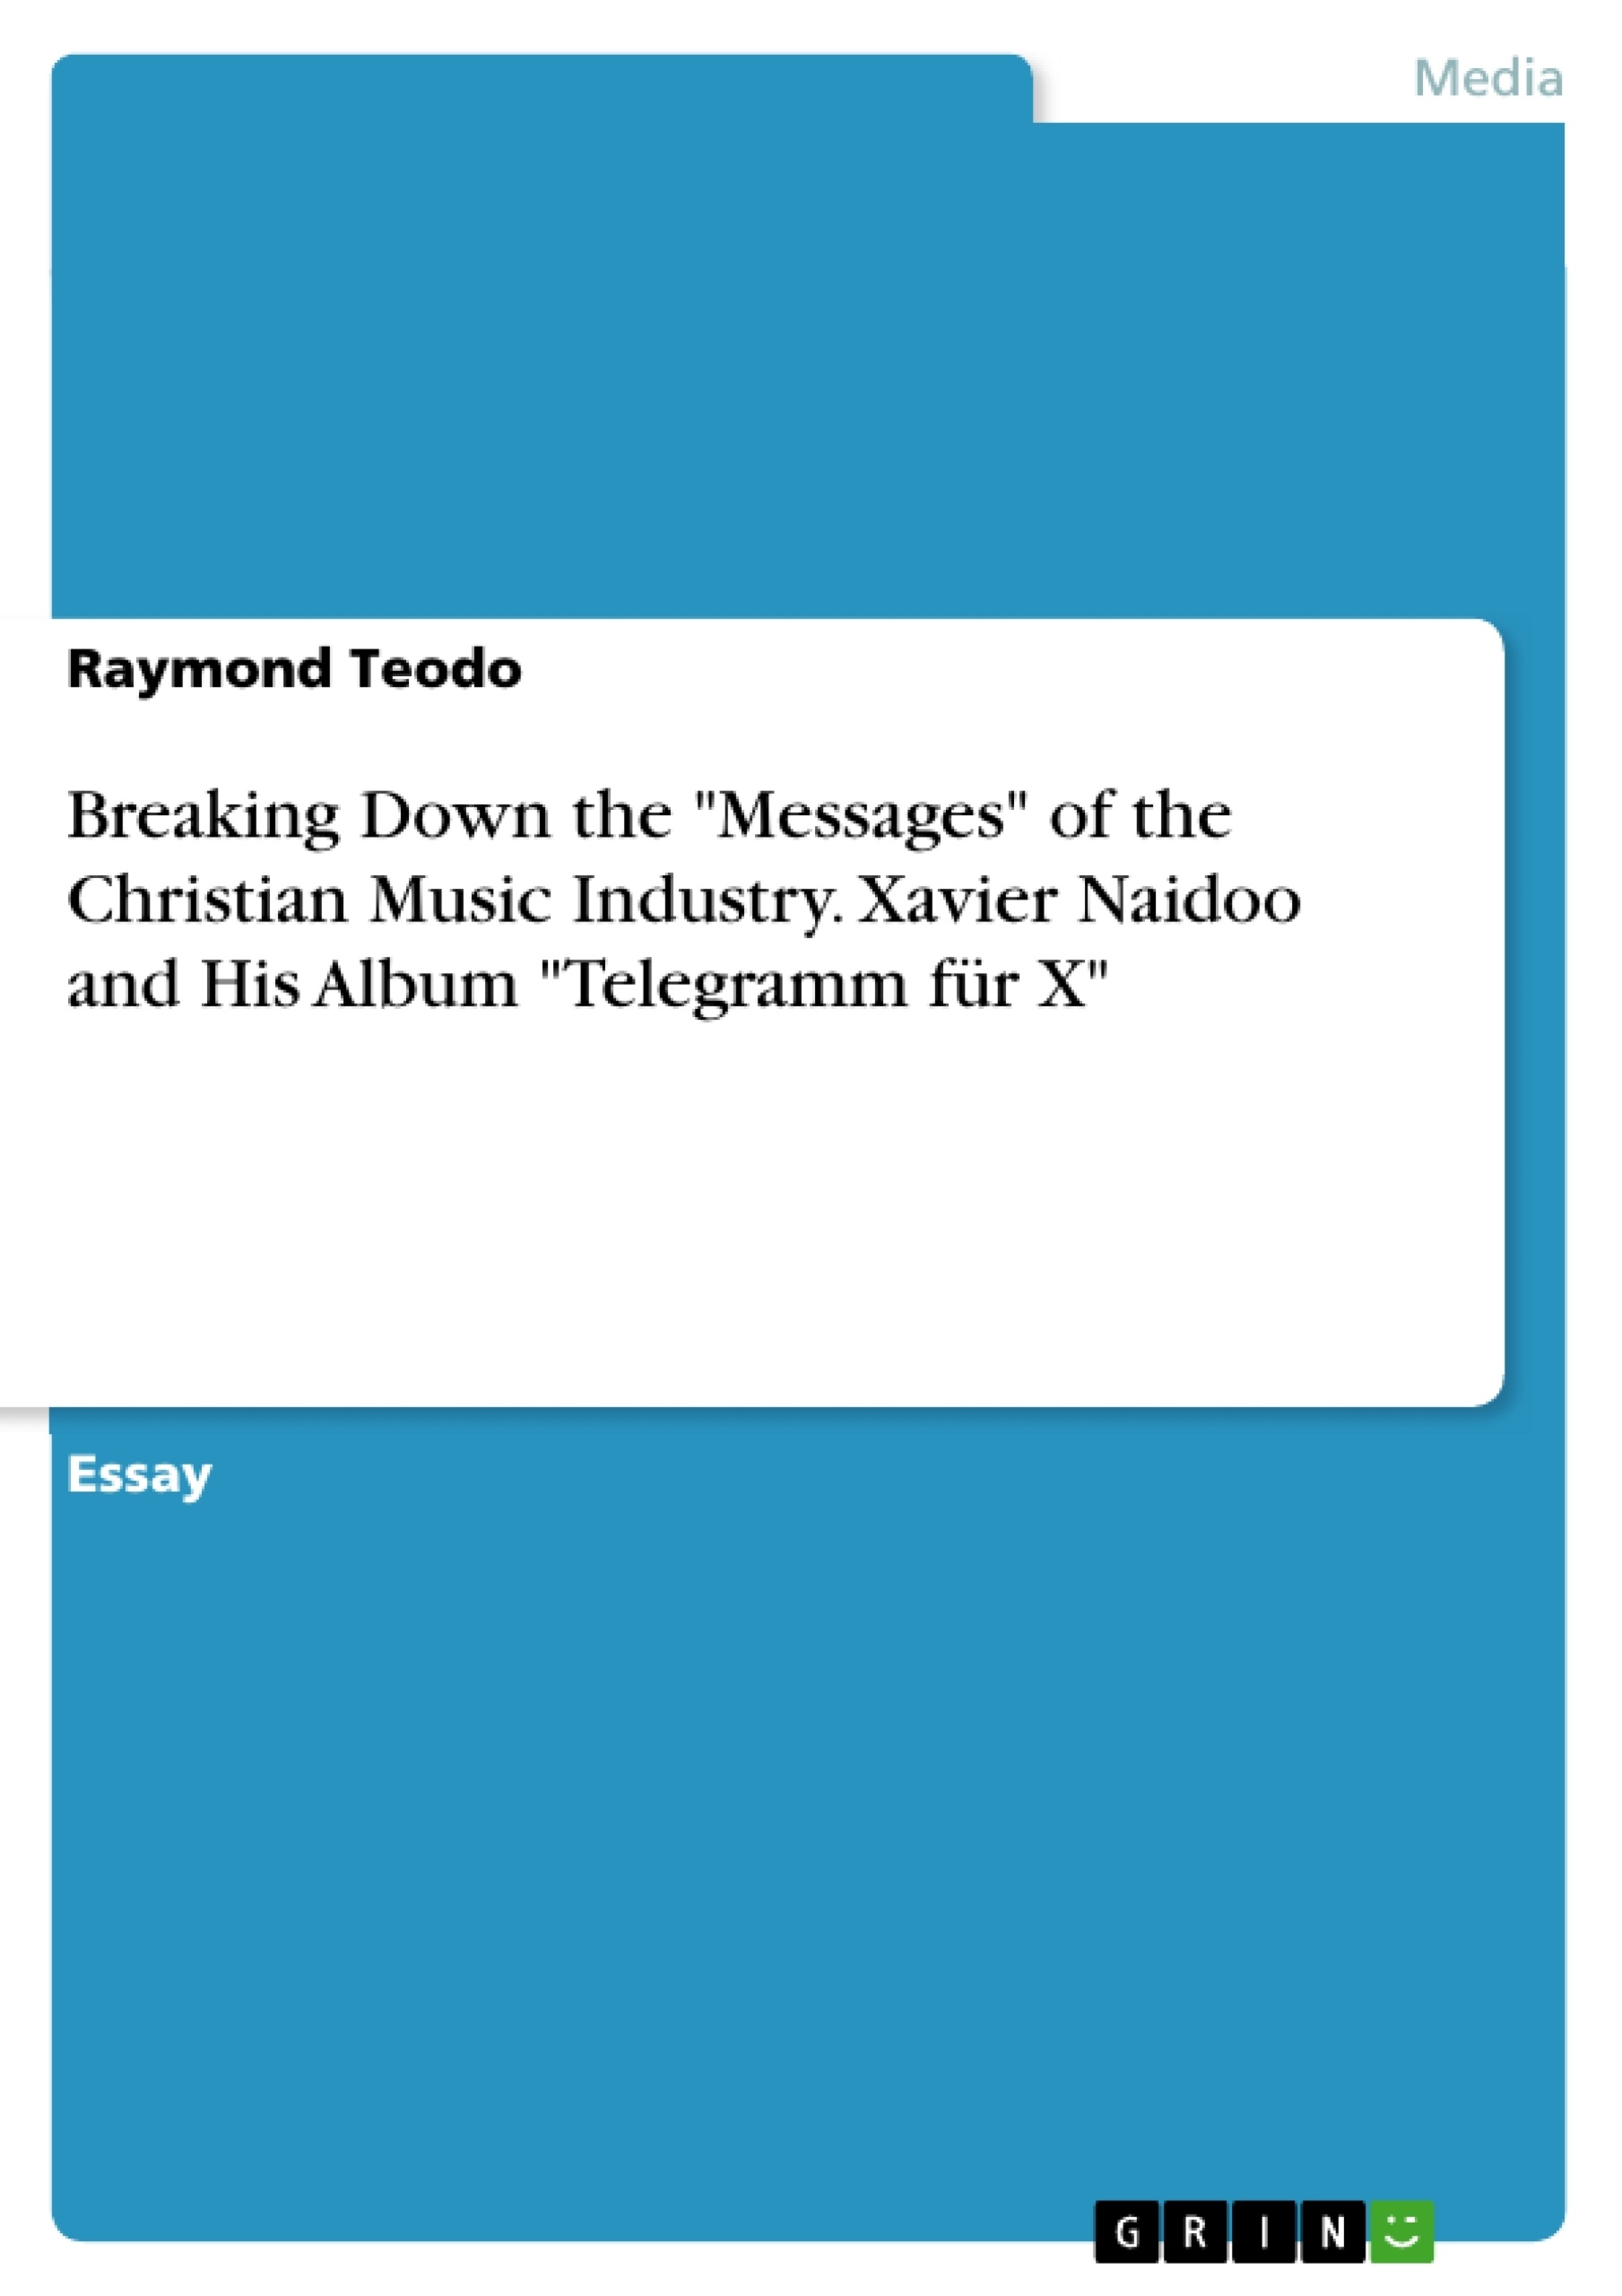 Título: Breaking Down the "Messages" of the Christian Music Industry. Xavier Naidoo and His Album "Telegramm für X"